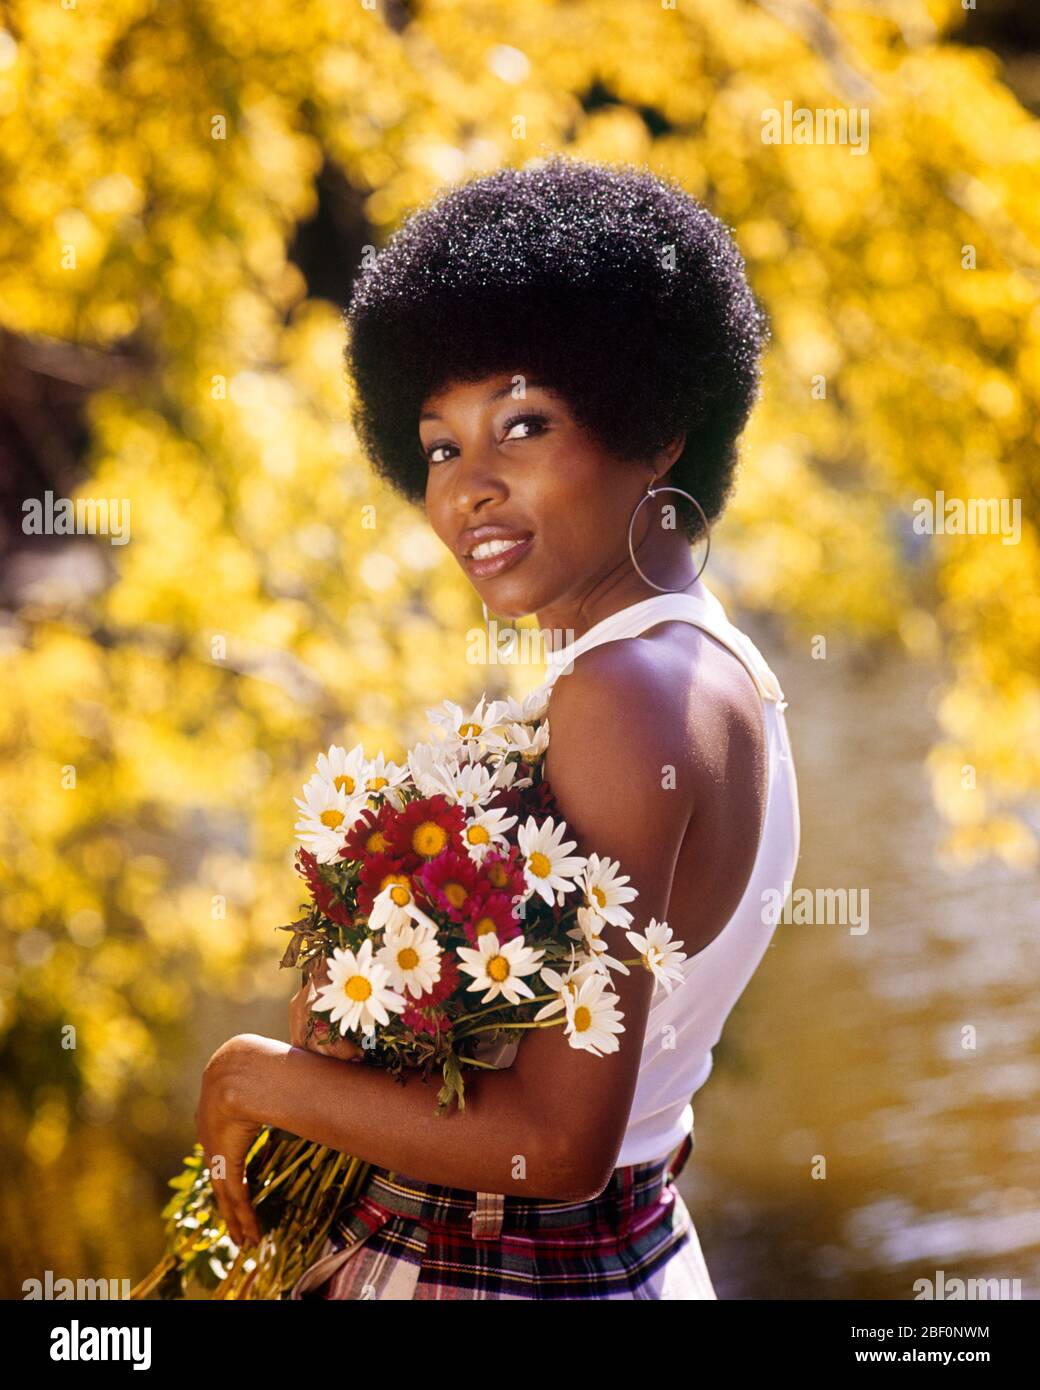 1970s SMILING AFRICAN AMERICAN WOMAN WEARING HOOP EARRINGS WHITE TANK TOP HOLDING A BOUQUET SPRING FLOWERS LOOKING AT CAMERA - kg6614 PHT001 HARS ETHNIC BLACK LOOKING BACK PRIDE SMILES STYLISH TANK TOP HOOP EARRINGS PEOPLE ADULTS UNIVERSITY COED YOUNG ADULT WOMAN AFRO HAIR STYLE OLD FASHIONED AFRICAN AMERICANS Stock Photo